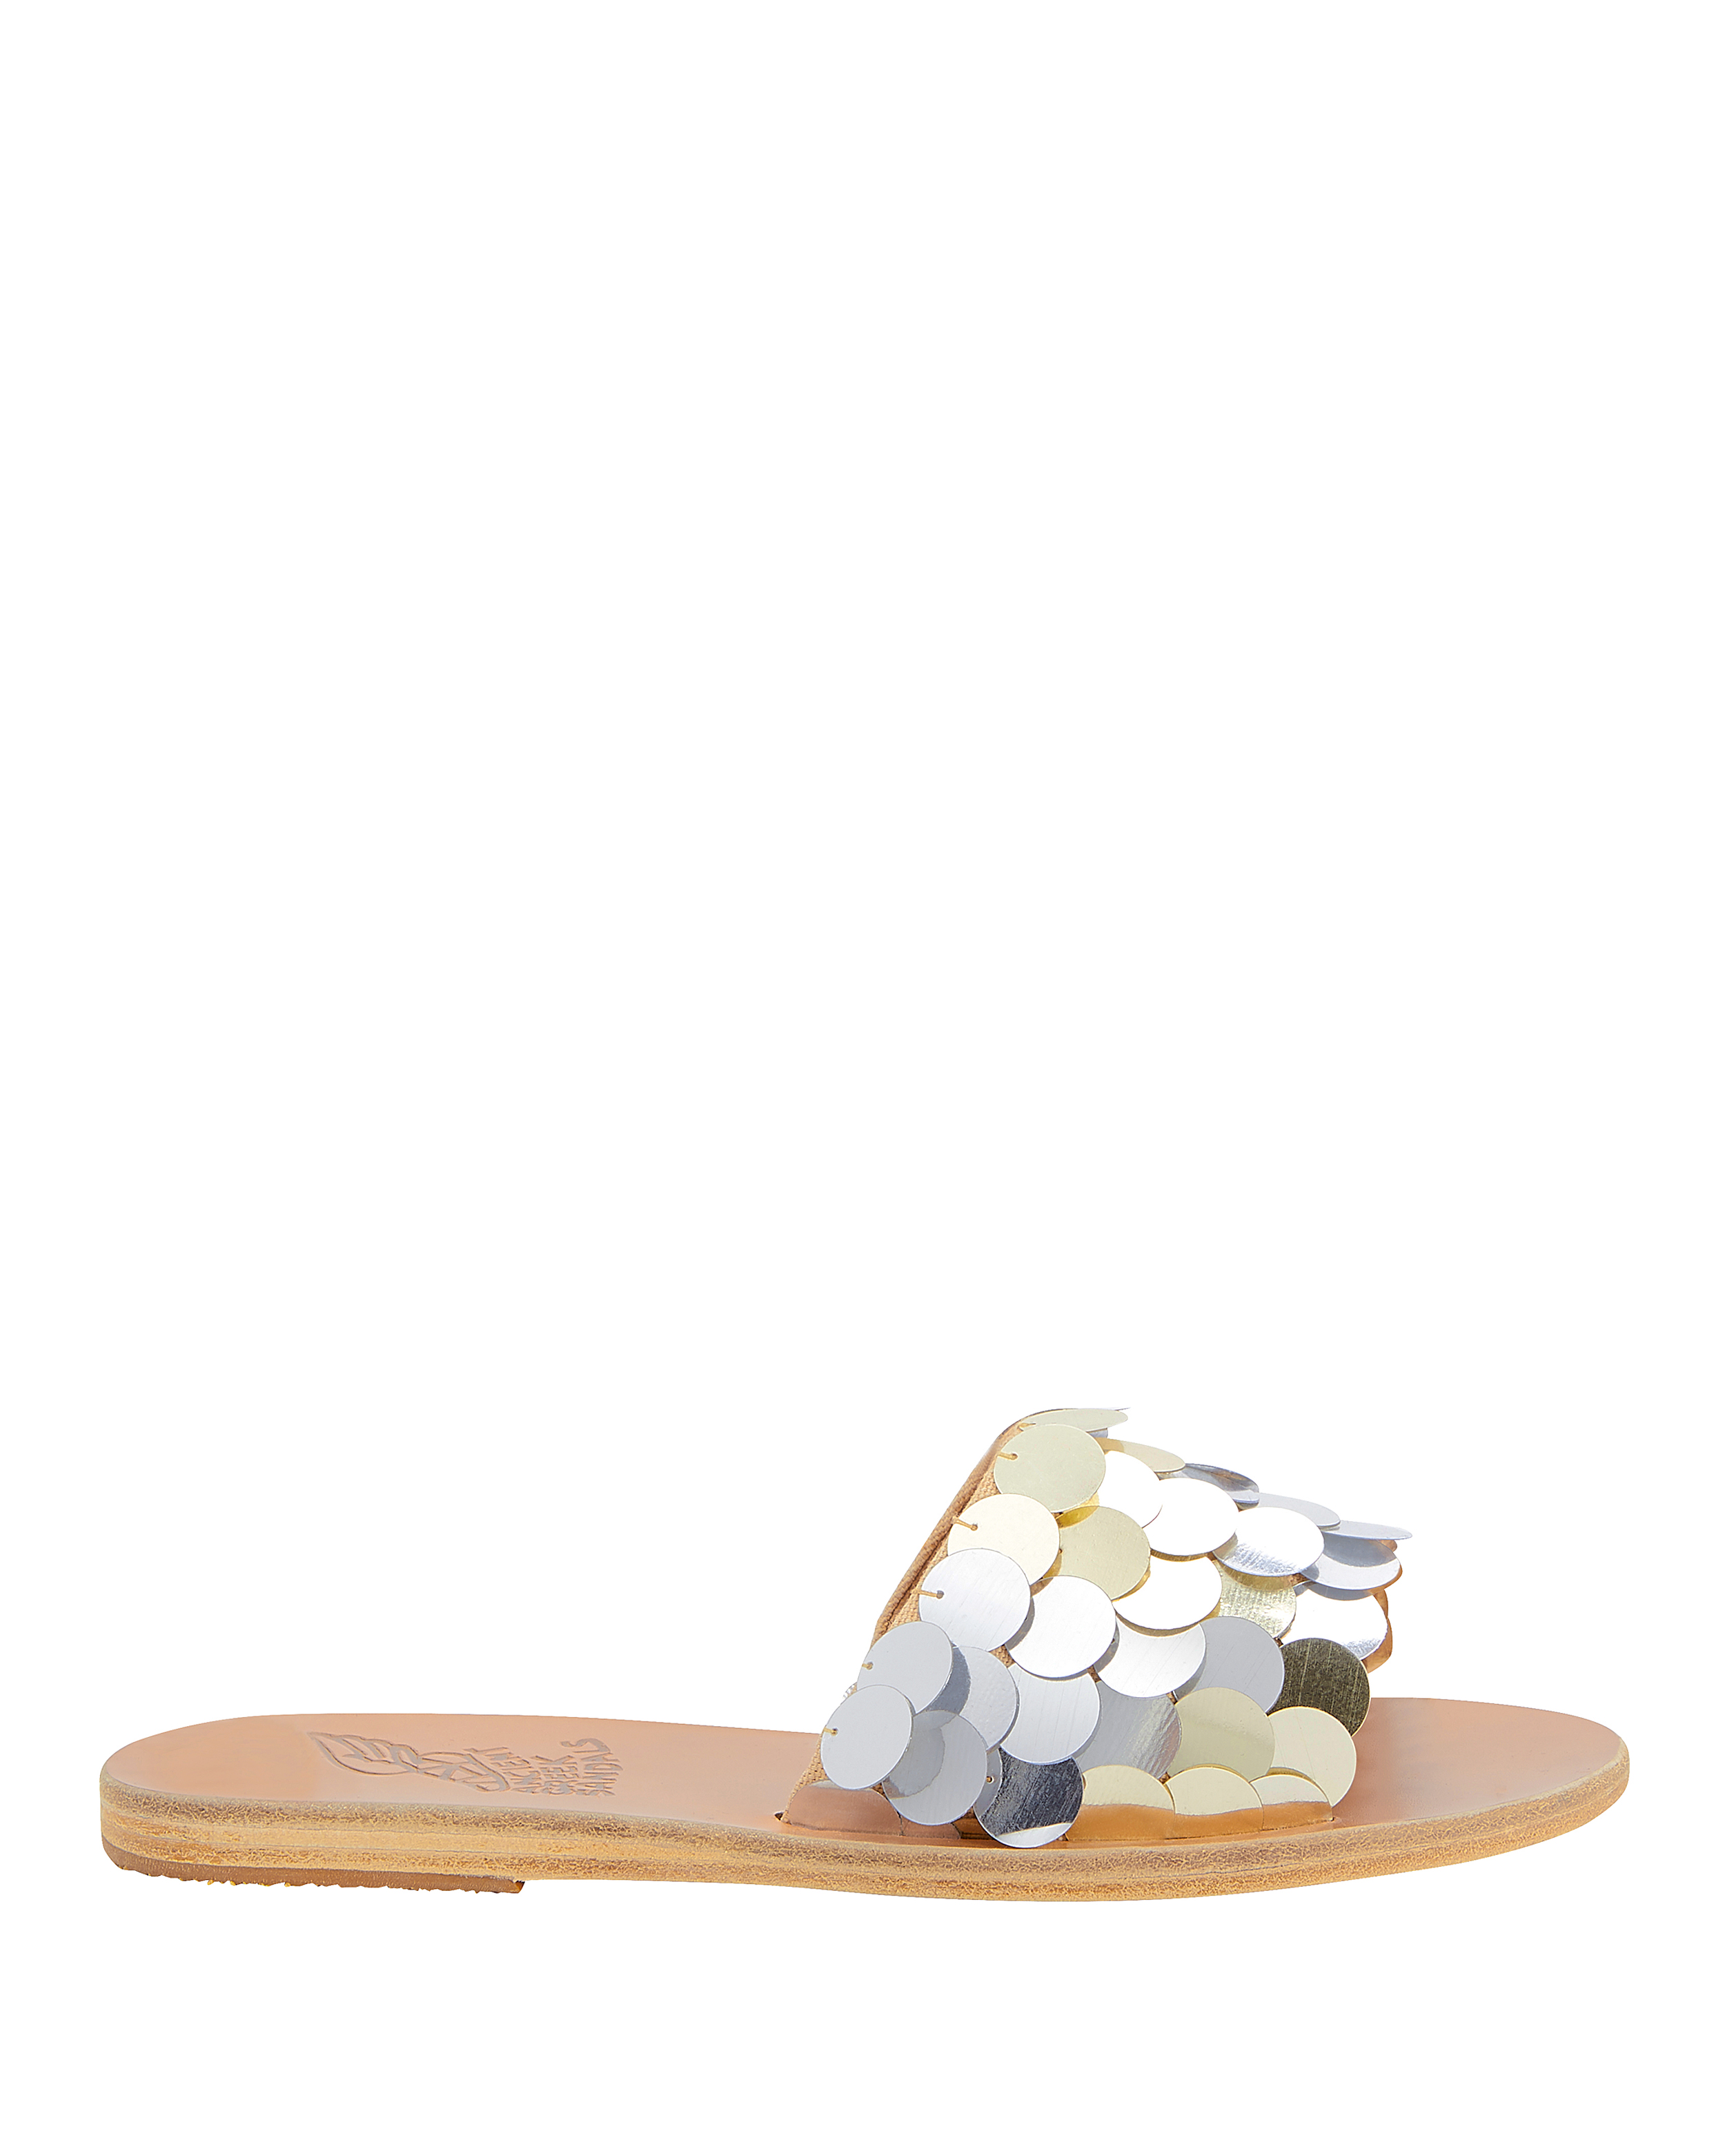 Taygete Sequin Flat Sandals